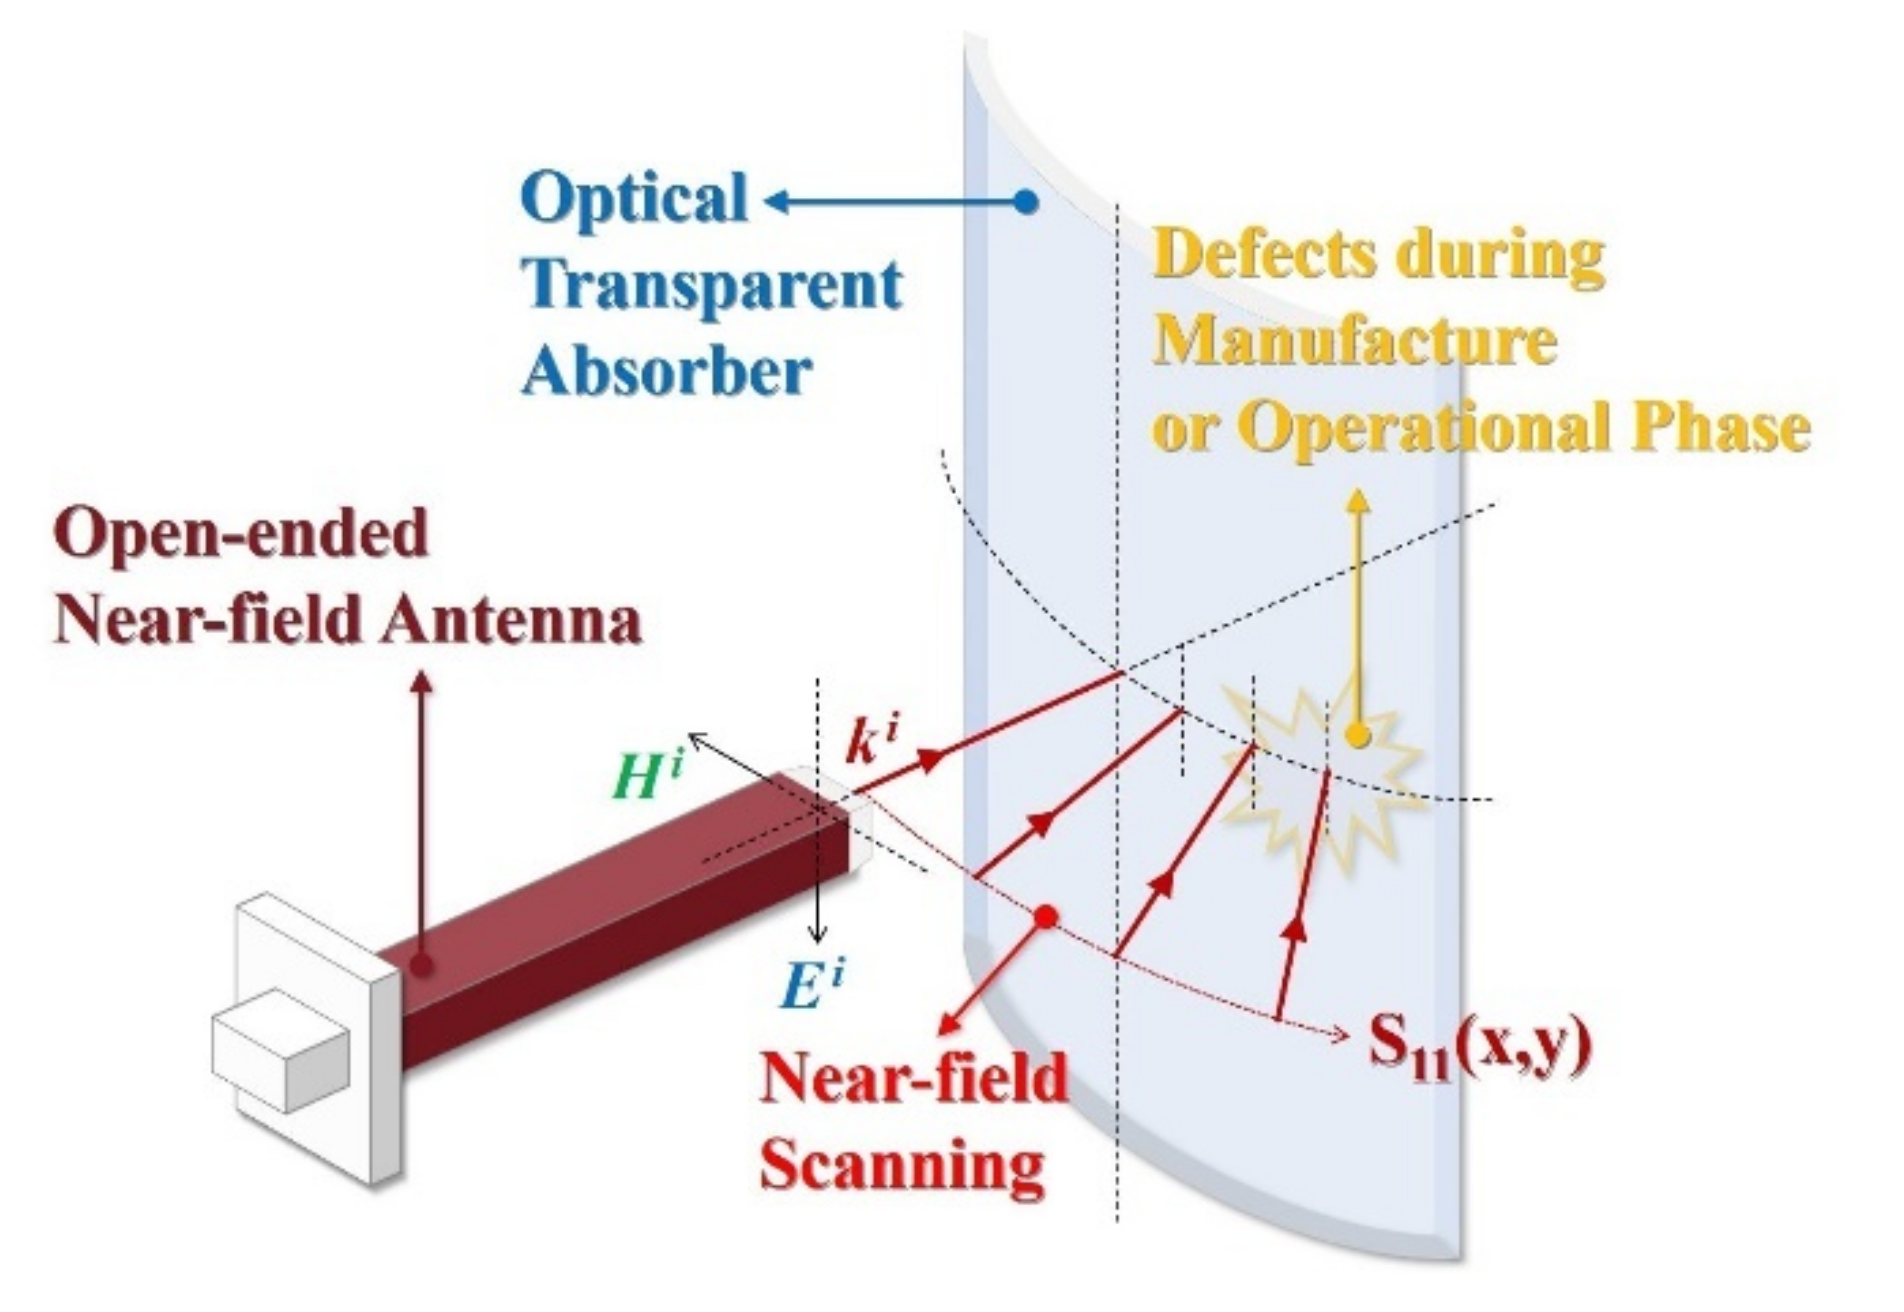 Sensors | Free Full-Text | Design of an Optical Transparent Absorber and  Defect Diagnostics Analysis Based on Near-Field Measurement